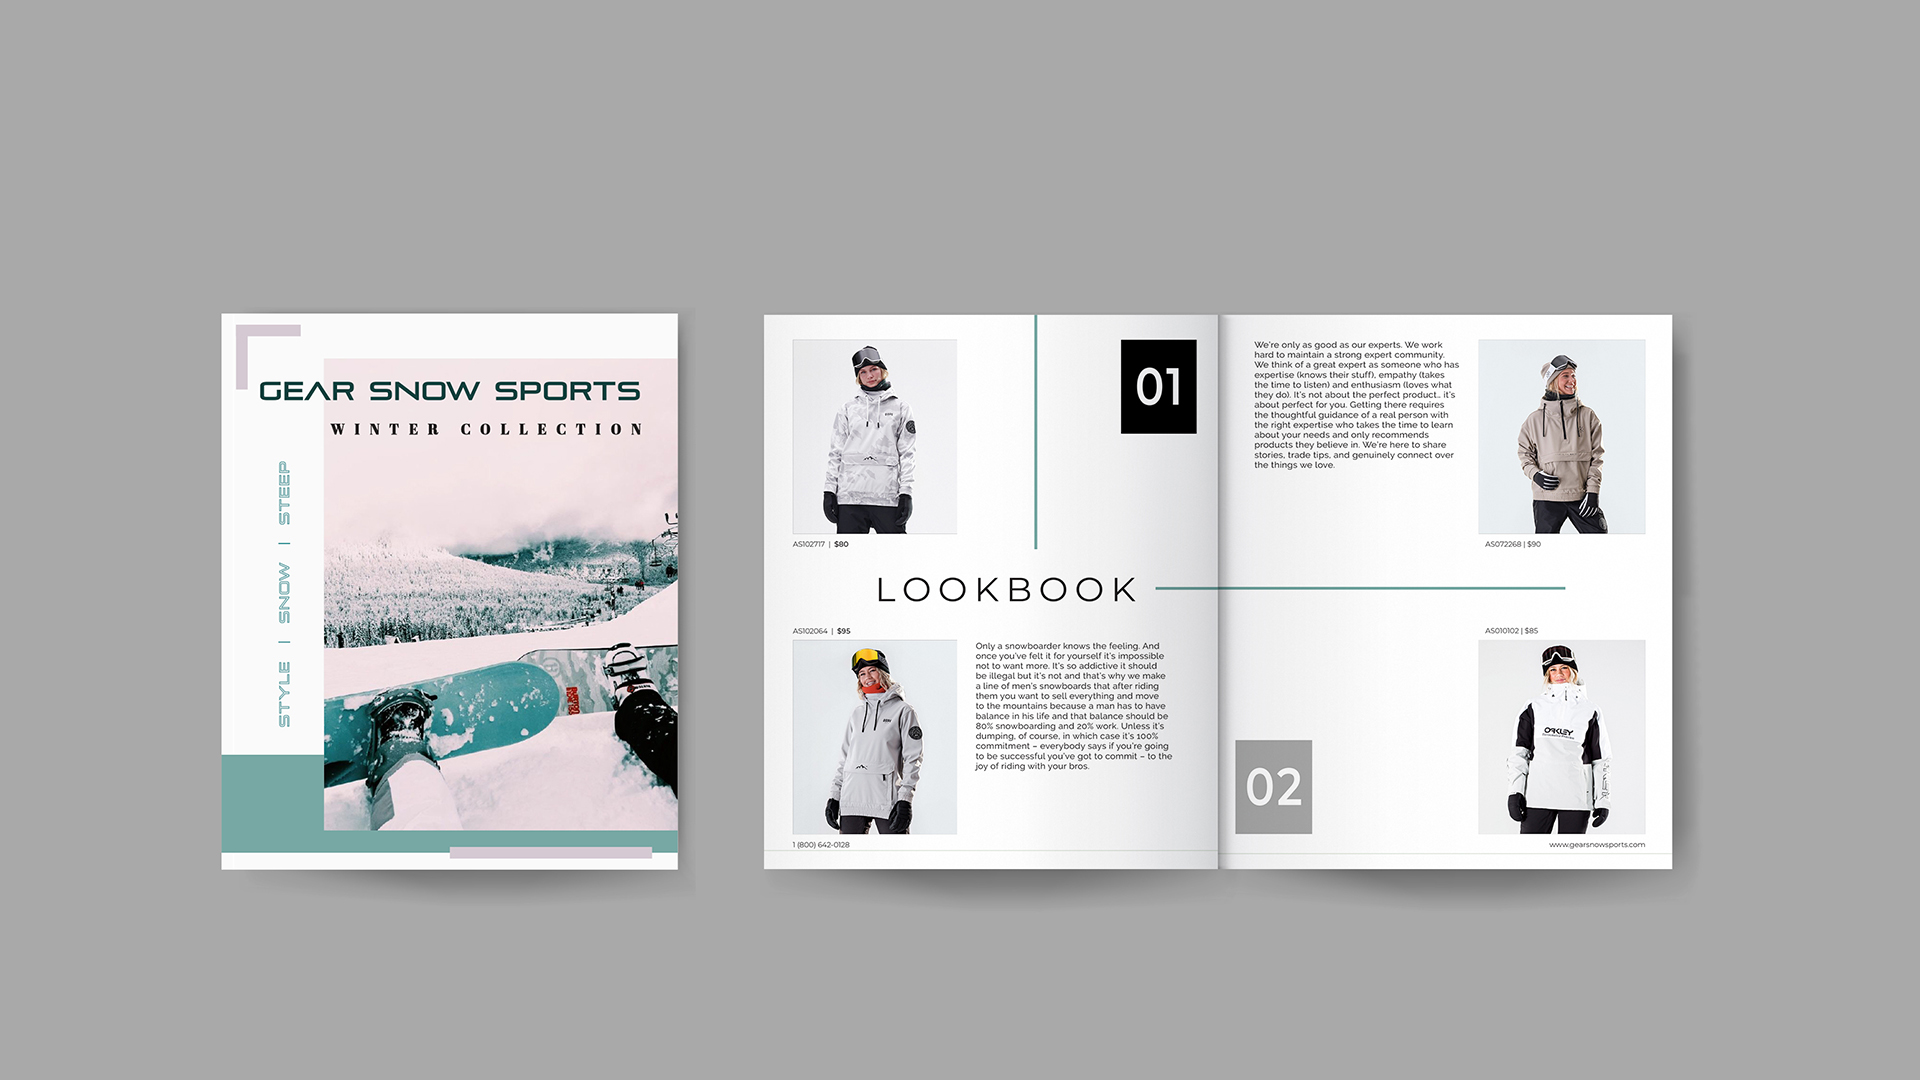 Gear Snow Sports / “Gear Snow Sports,” magazine, 8.5 x 11 inches print, 2020. This ad introduces a minimalistic layout to showcase their winter collection of ski gear. 